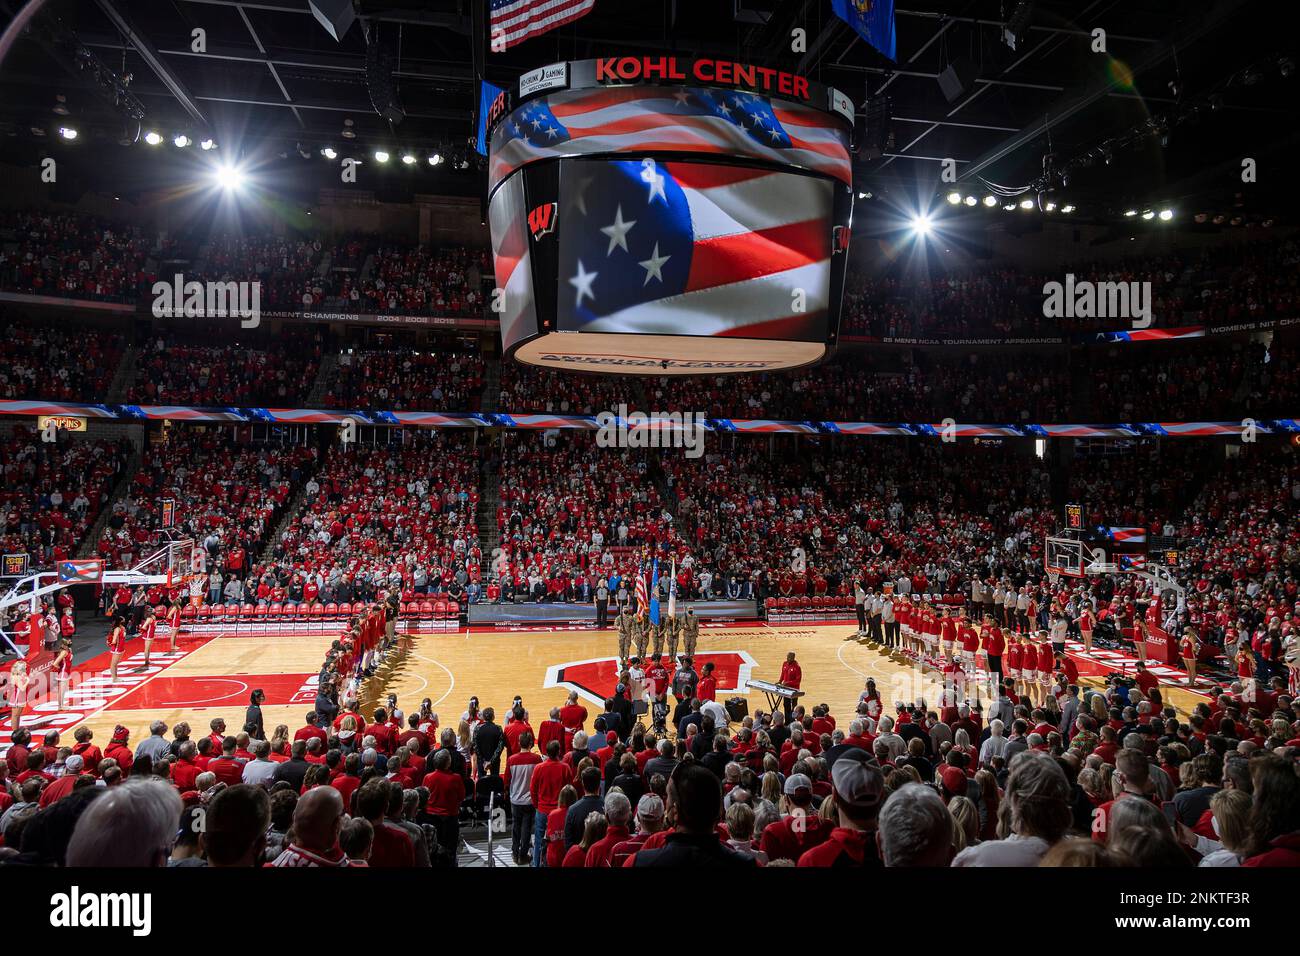 https://c8.alamy.com/comp/2NKTF3R/the-university-of-wisconsin-color-guard-presents-the-flags-during-the-national-anthem-prior-to-the-wisconsin-badgers-ncaa-college-mens-basketball-game-against-the-rutgers-scarlet-knights-saturday-feb-12-2022-in-madison-wis-the-scarlet-knights-won-73-65-david-stluka-via-ap-2NKTF3R.jpg